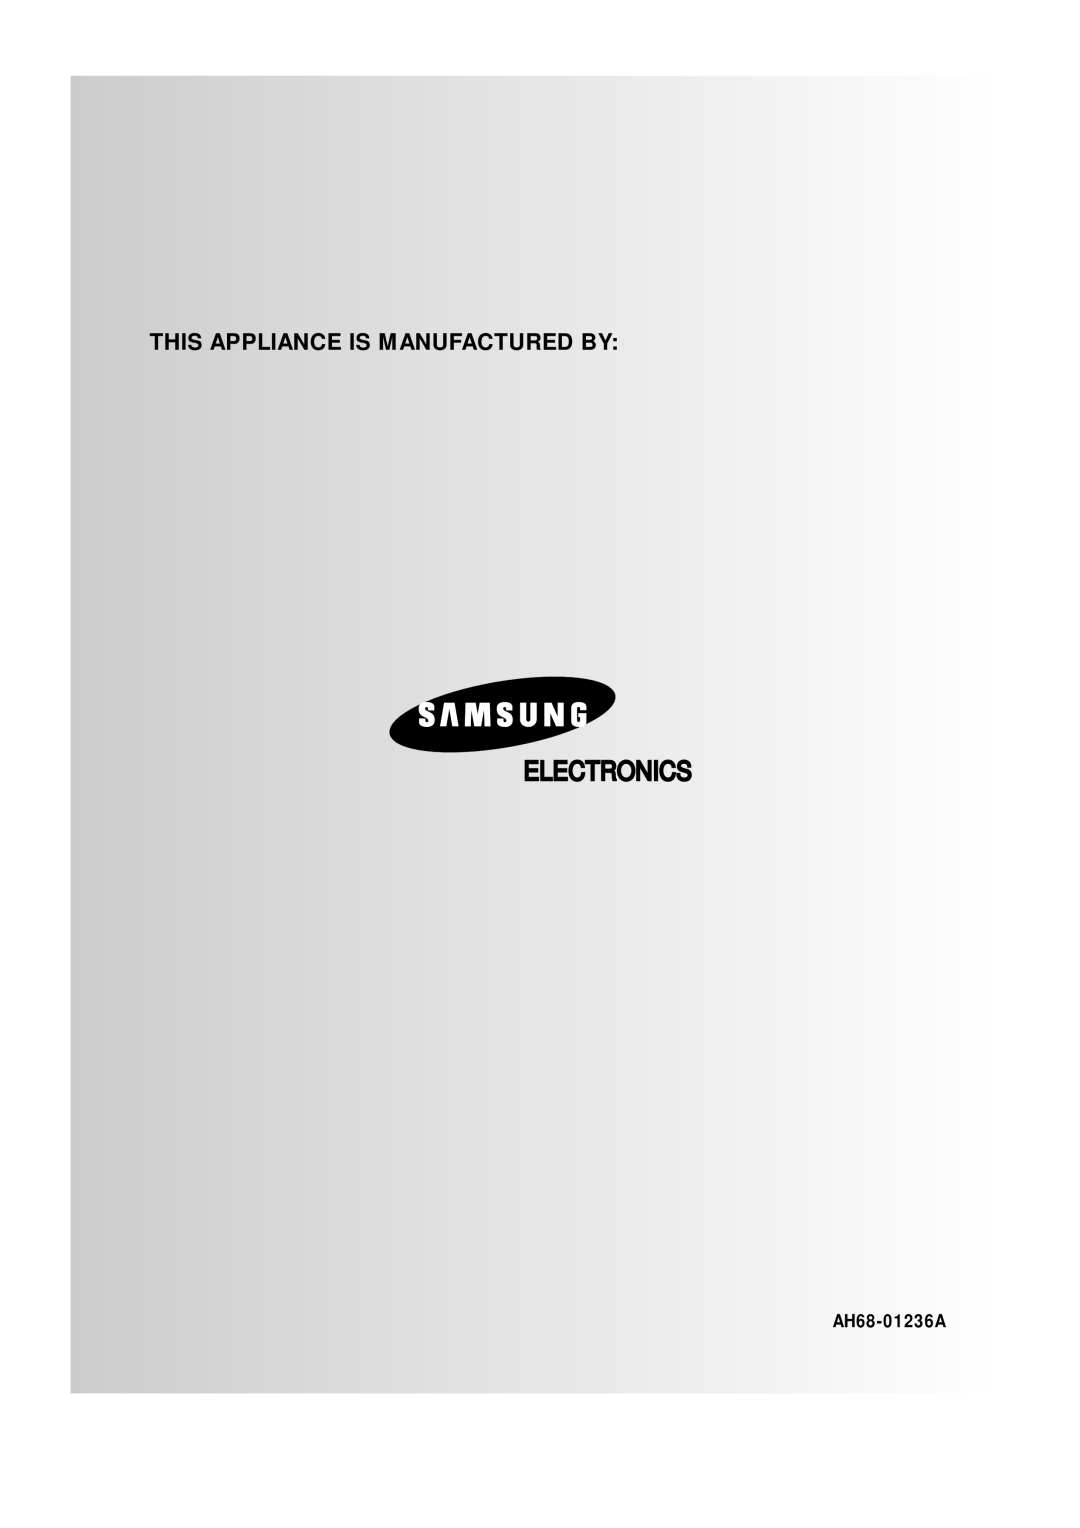 Samsung MAX-VS750, MAX-VS730 instruction manual AH68-01236A, Electronics, This Appliance Is Manufactured By 